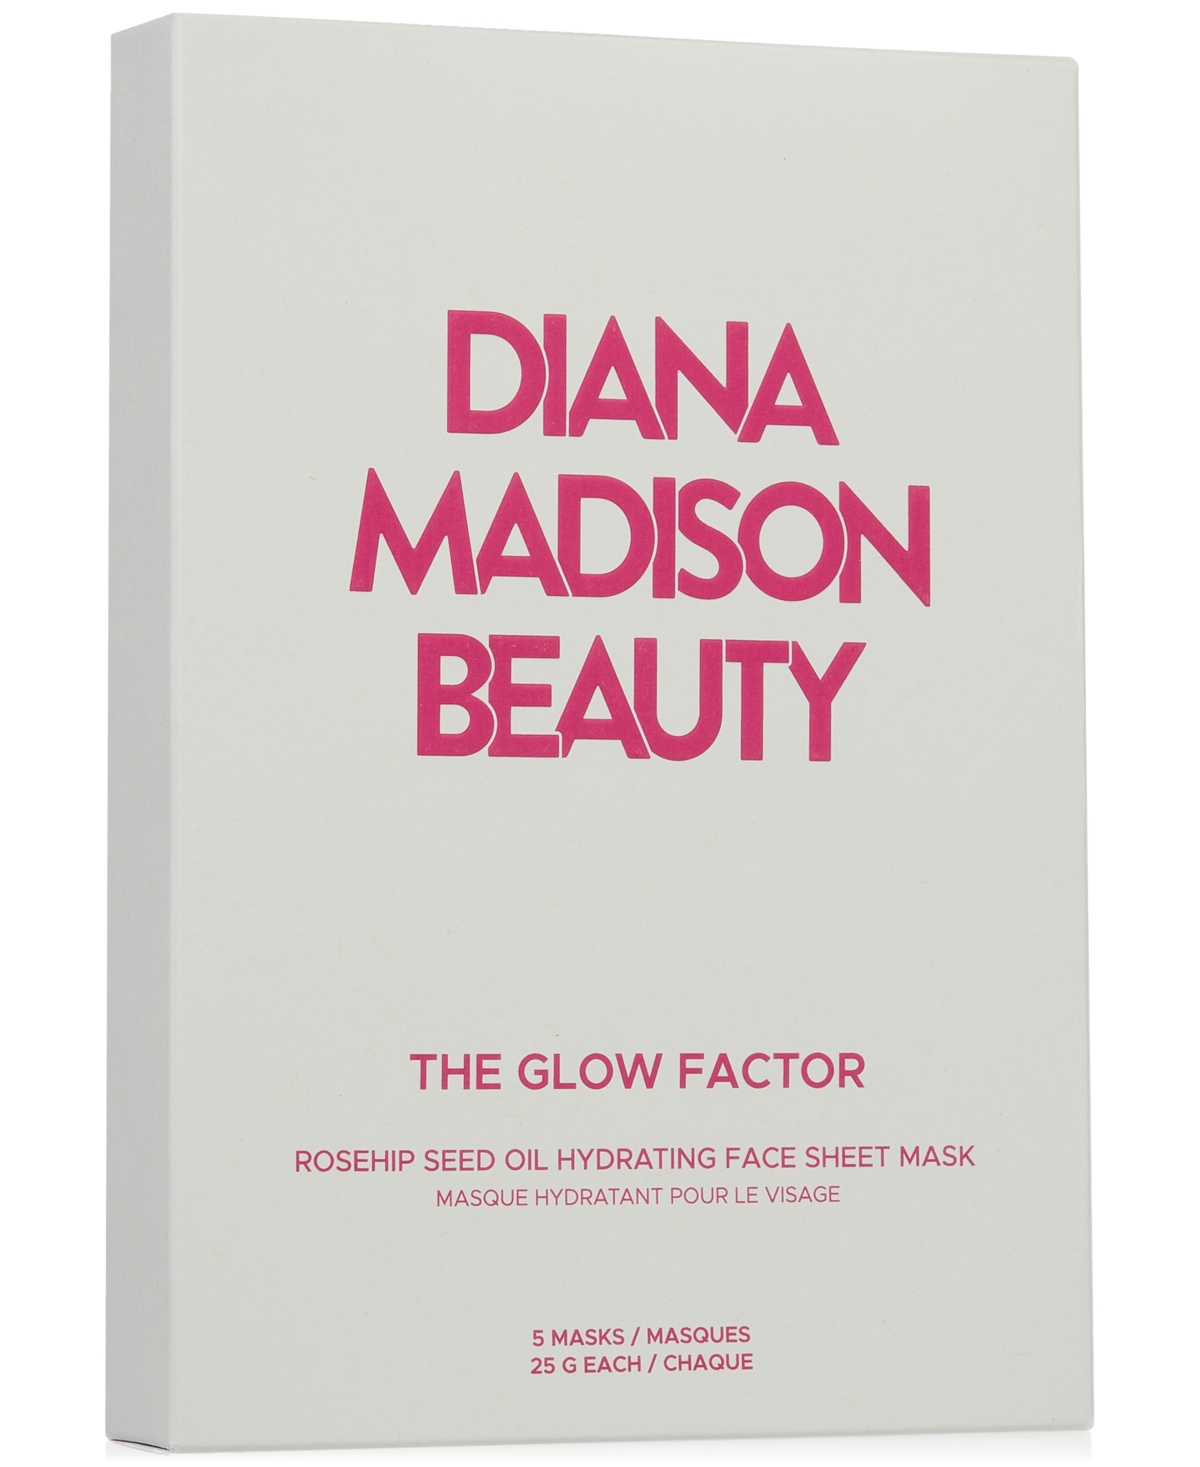 Diana Madison Beauty The Glow Factor Rosehip Seed Oil Hydrating Face Sheet Mask, 5-pk.